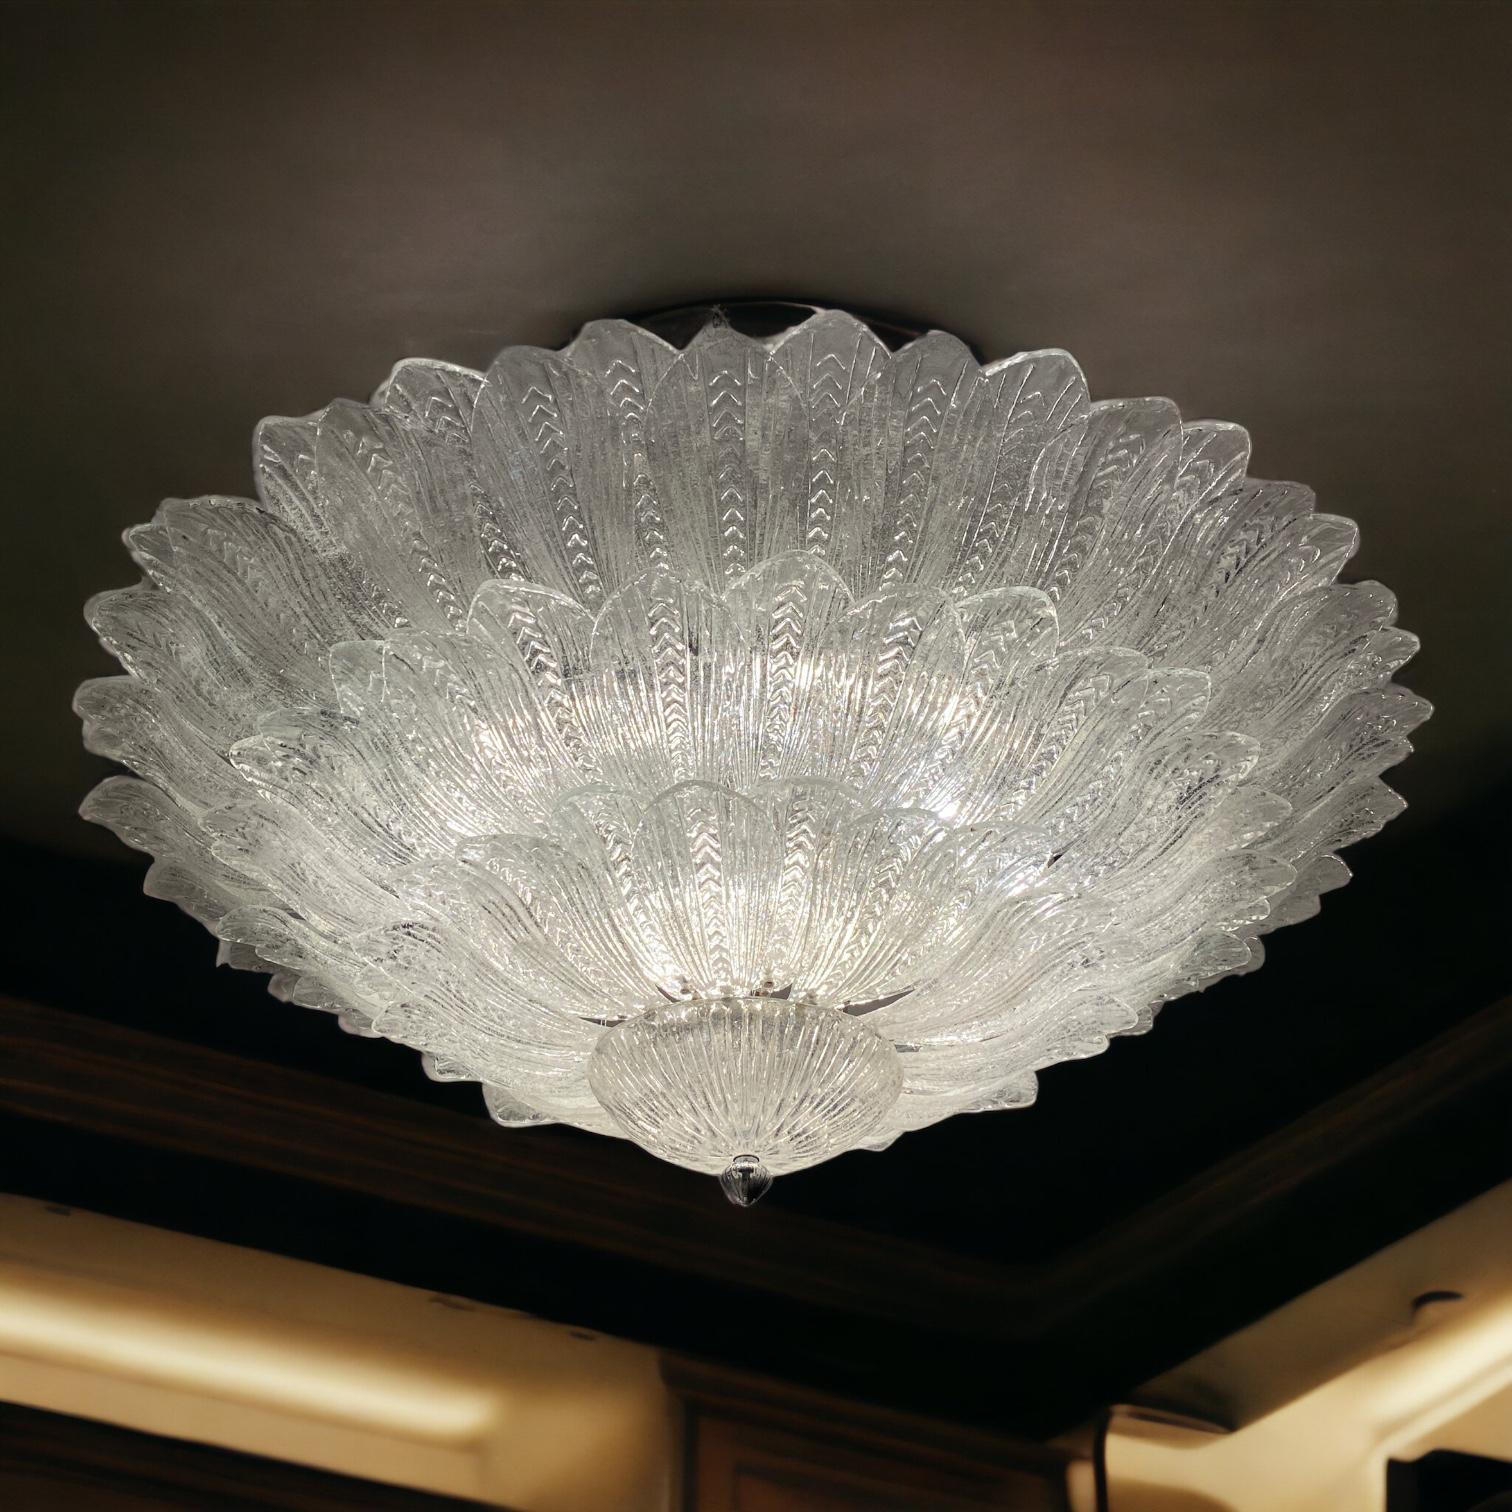 Fabulous Italian Murano Glass Monumental Ceiling Light or Flushmount In New Condition For Sale In Rome, IT